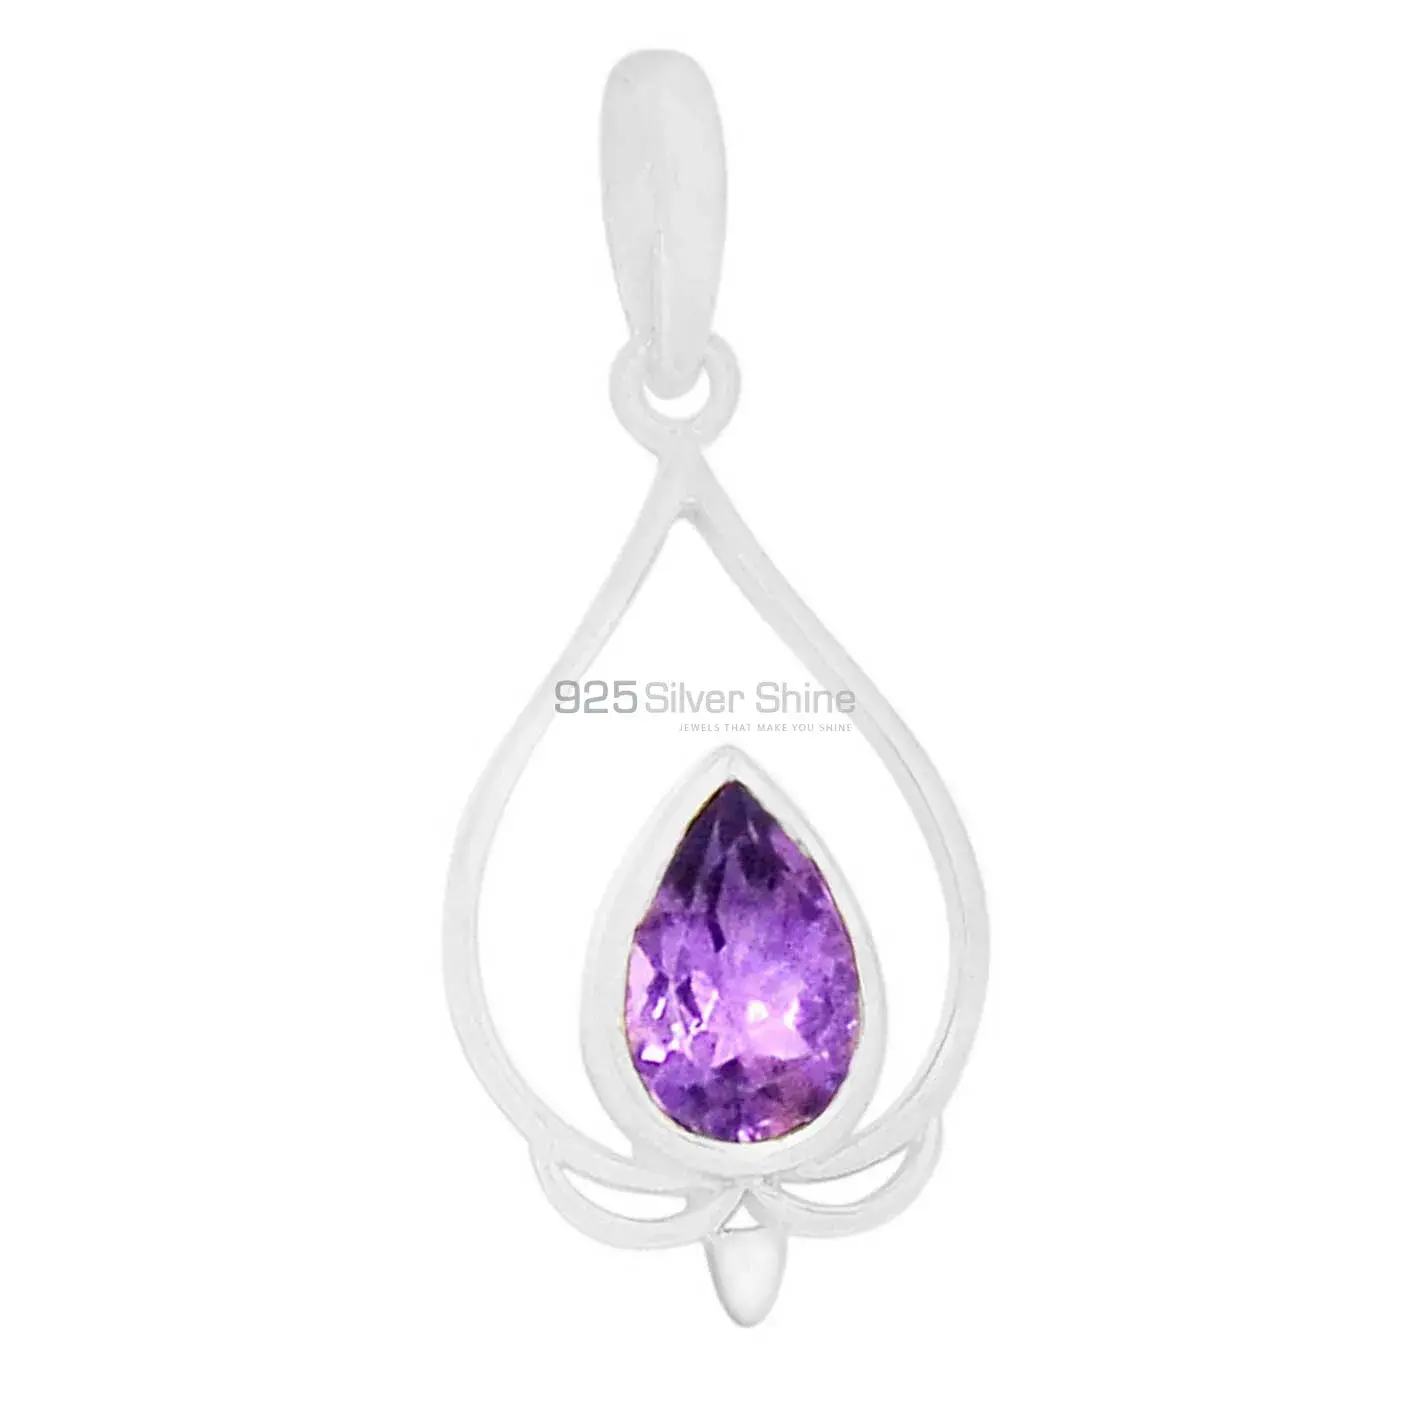 High Quality Amethyst Gemstone Pendants Exporters In 925 Solid Silver Jewelry 925SP274-1_1